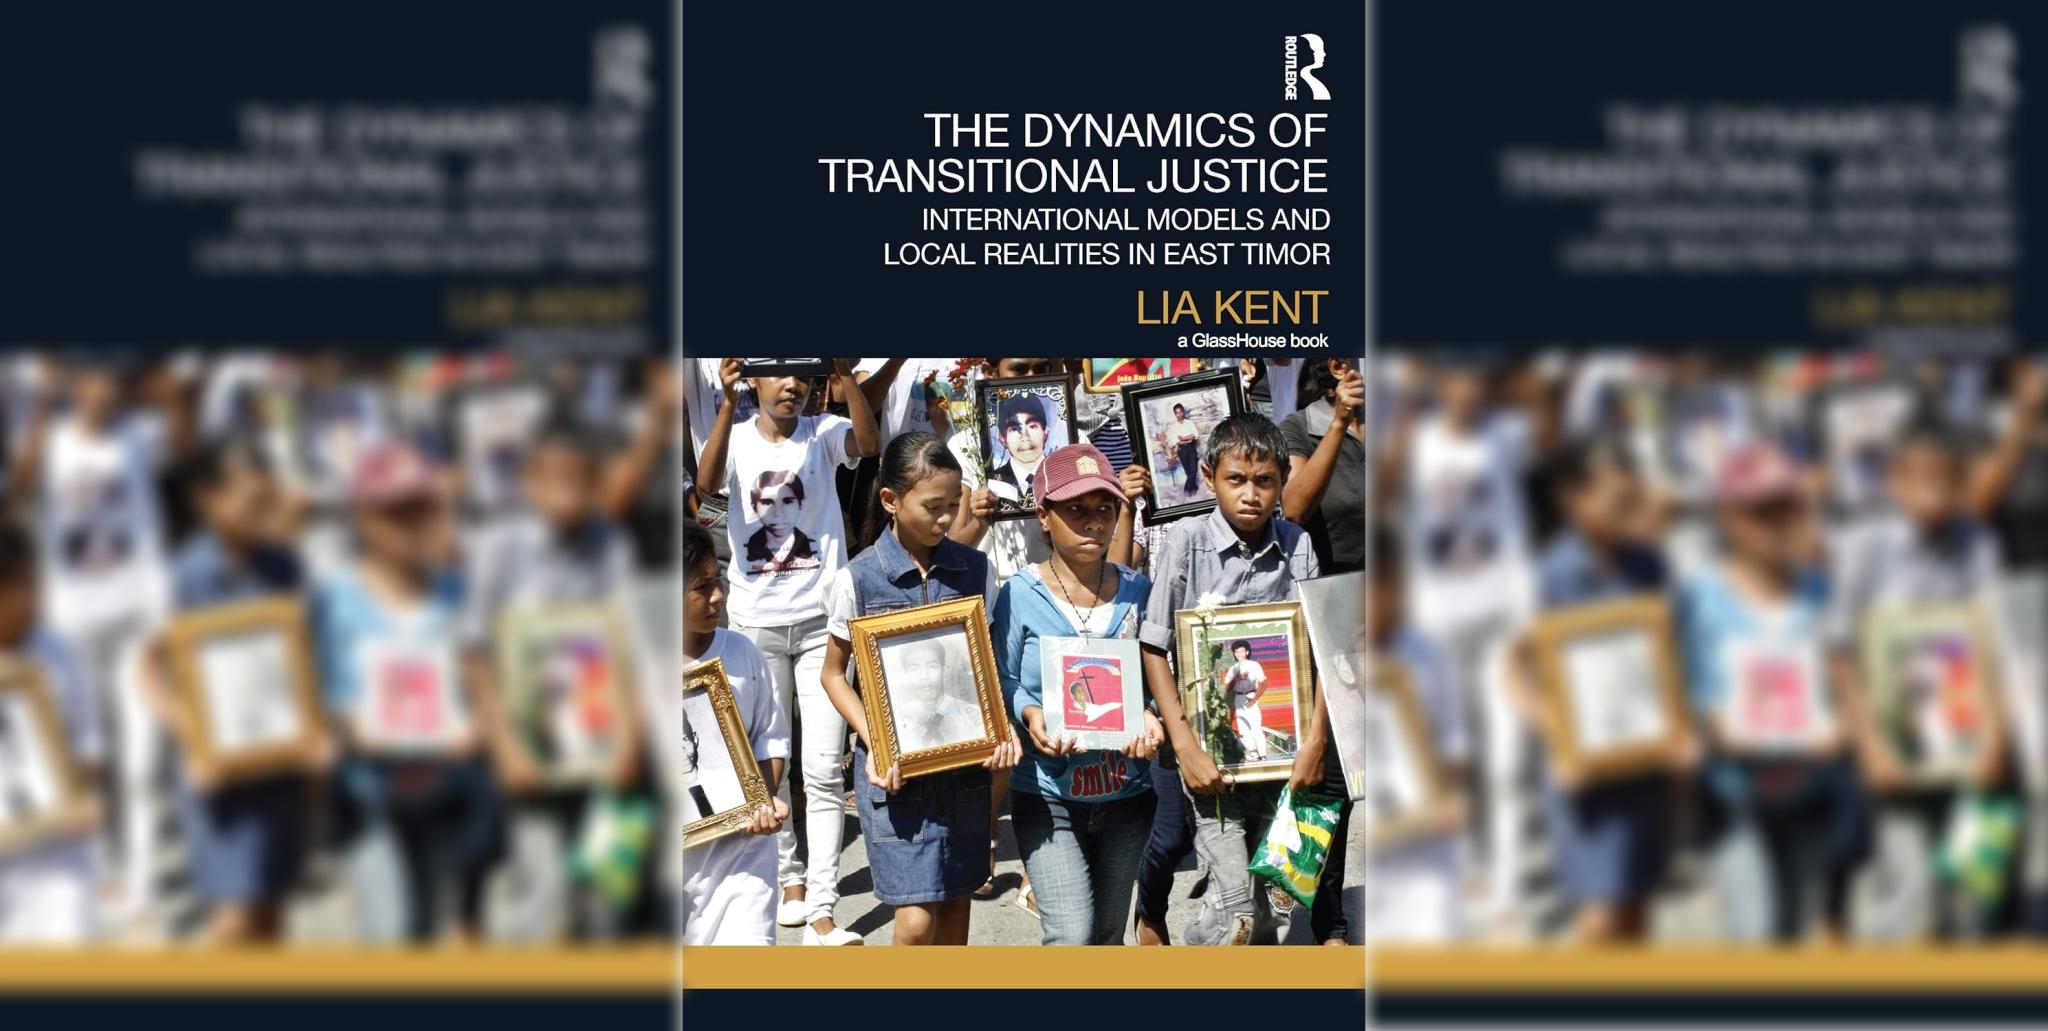  The Dynamics of Transitional Justice: International Models and Local Realities in East Timor